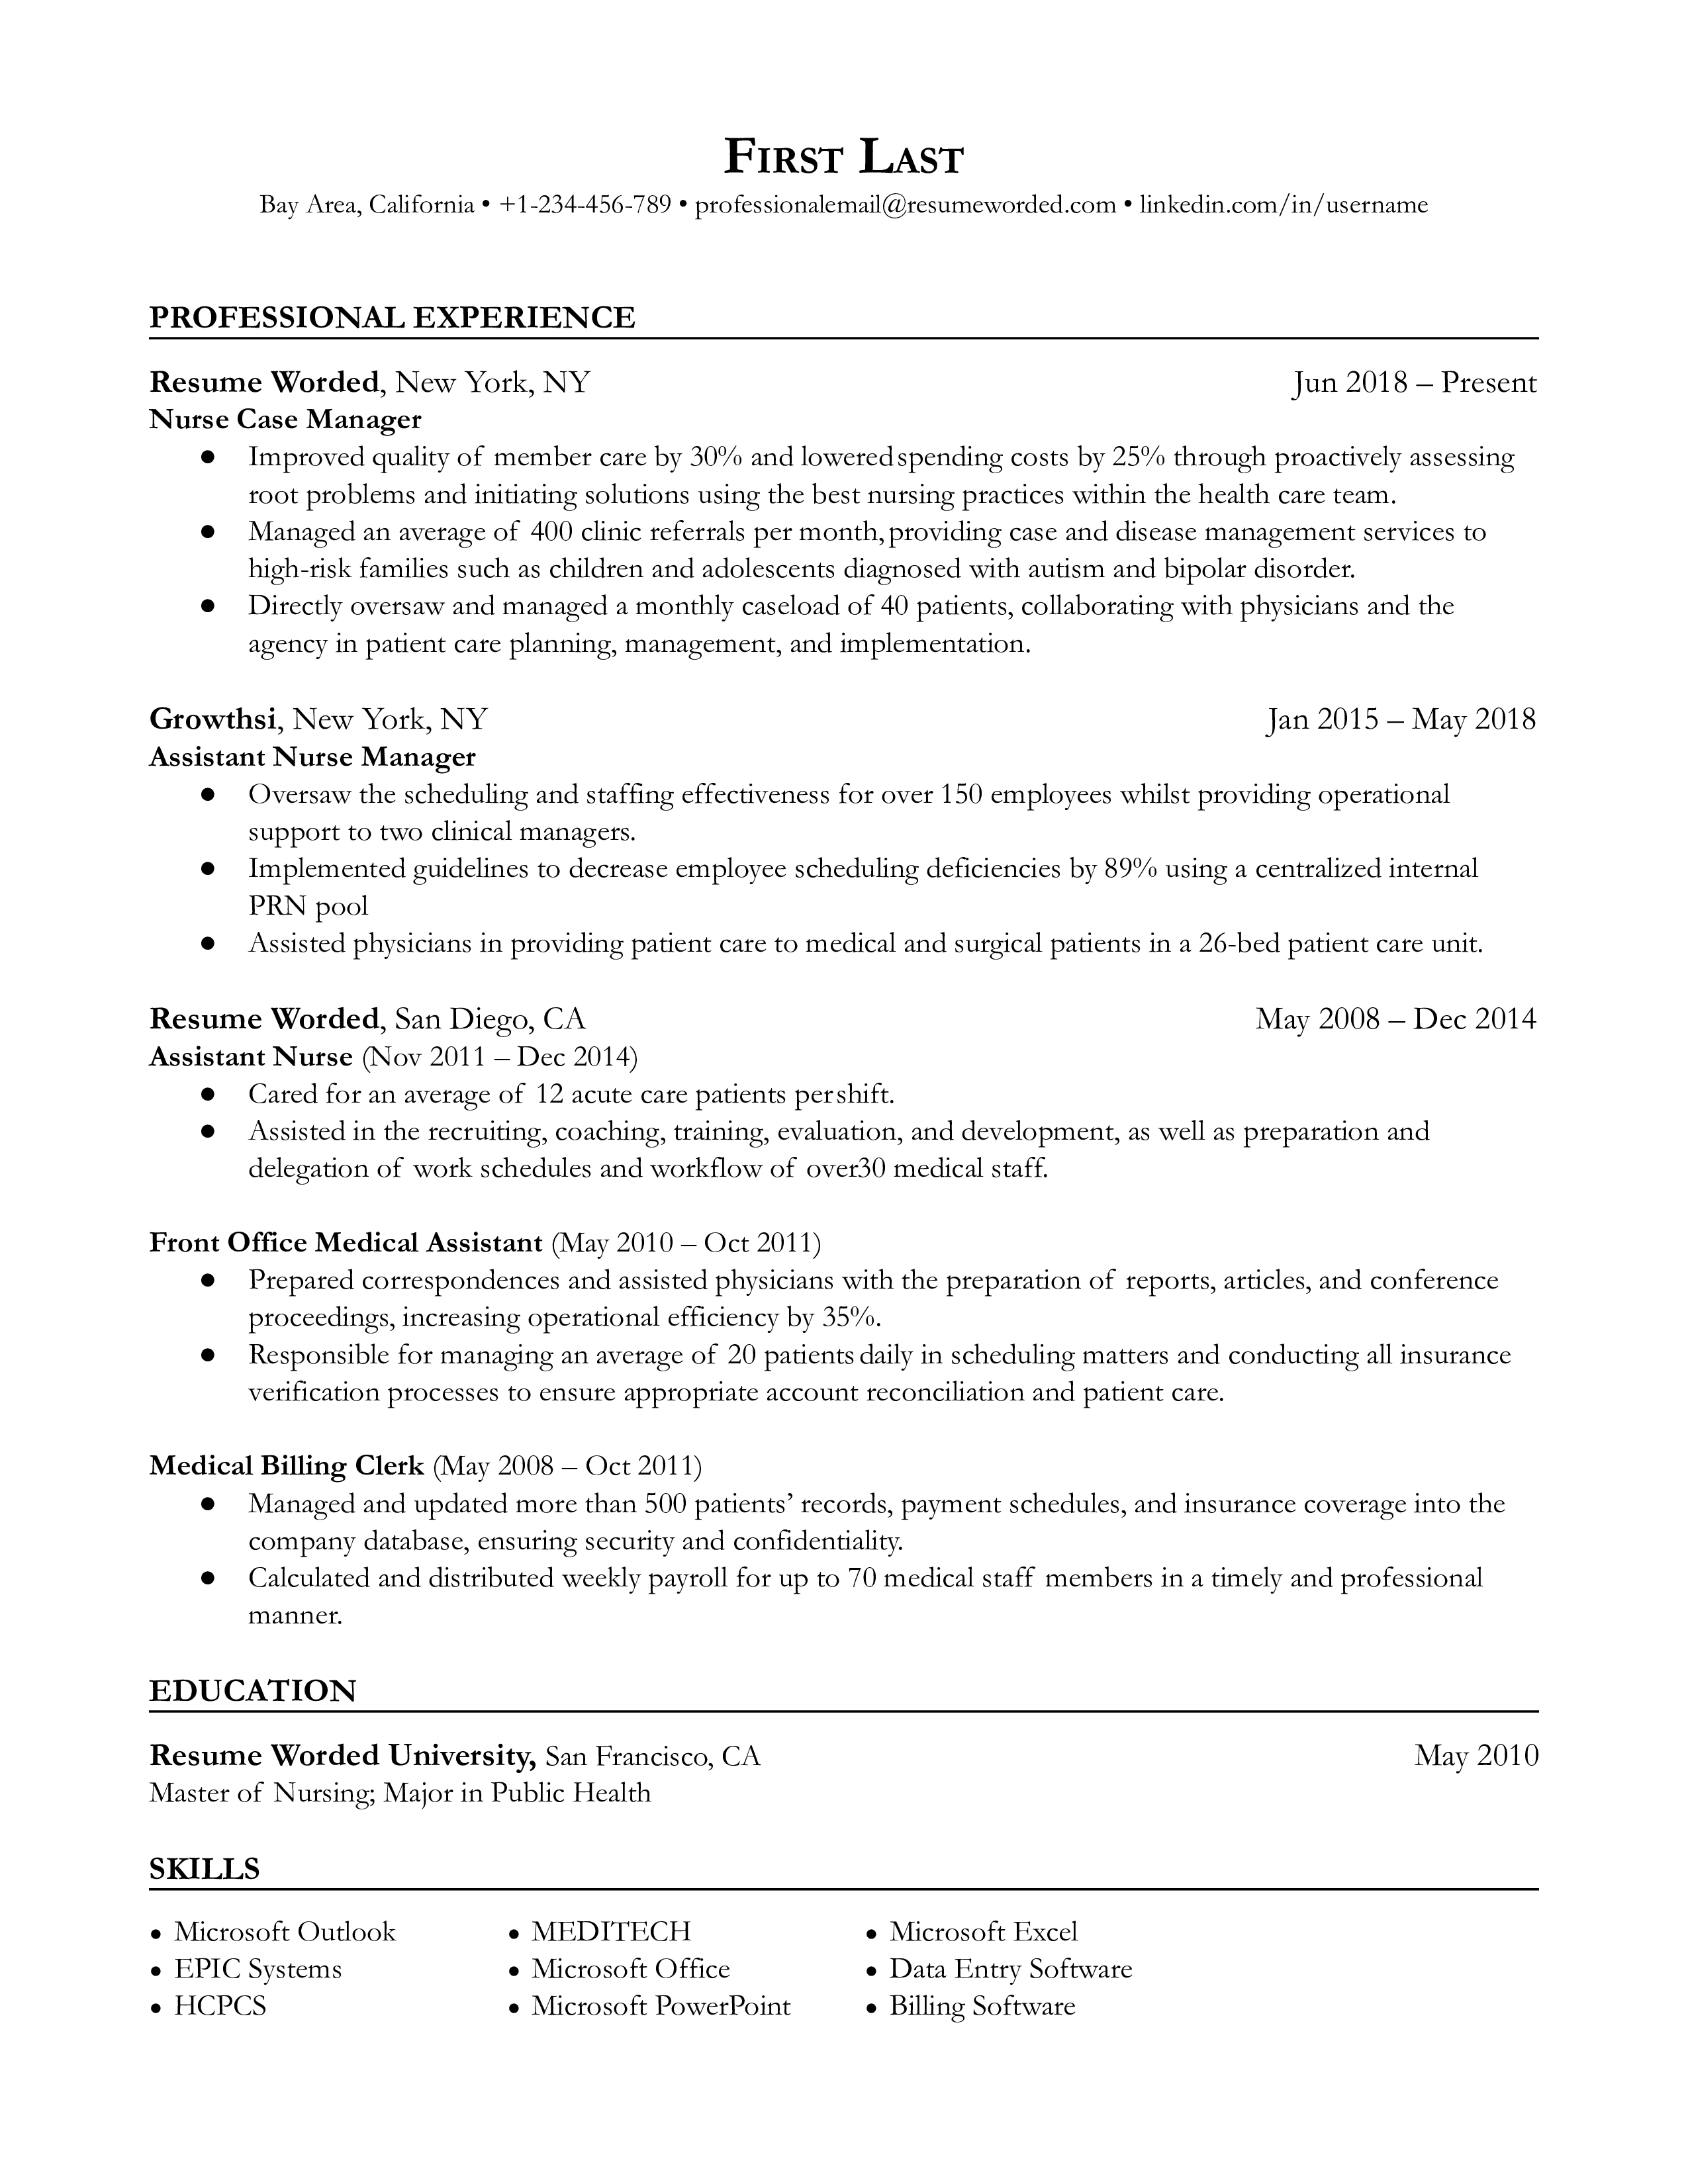 A Nurse Case Manager's CV demonstrating healthcare system knowledge and improved patient outcomes.